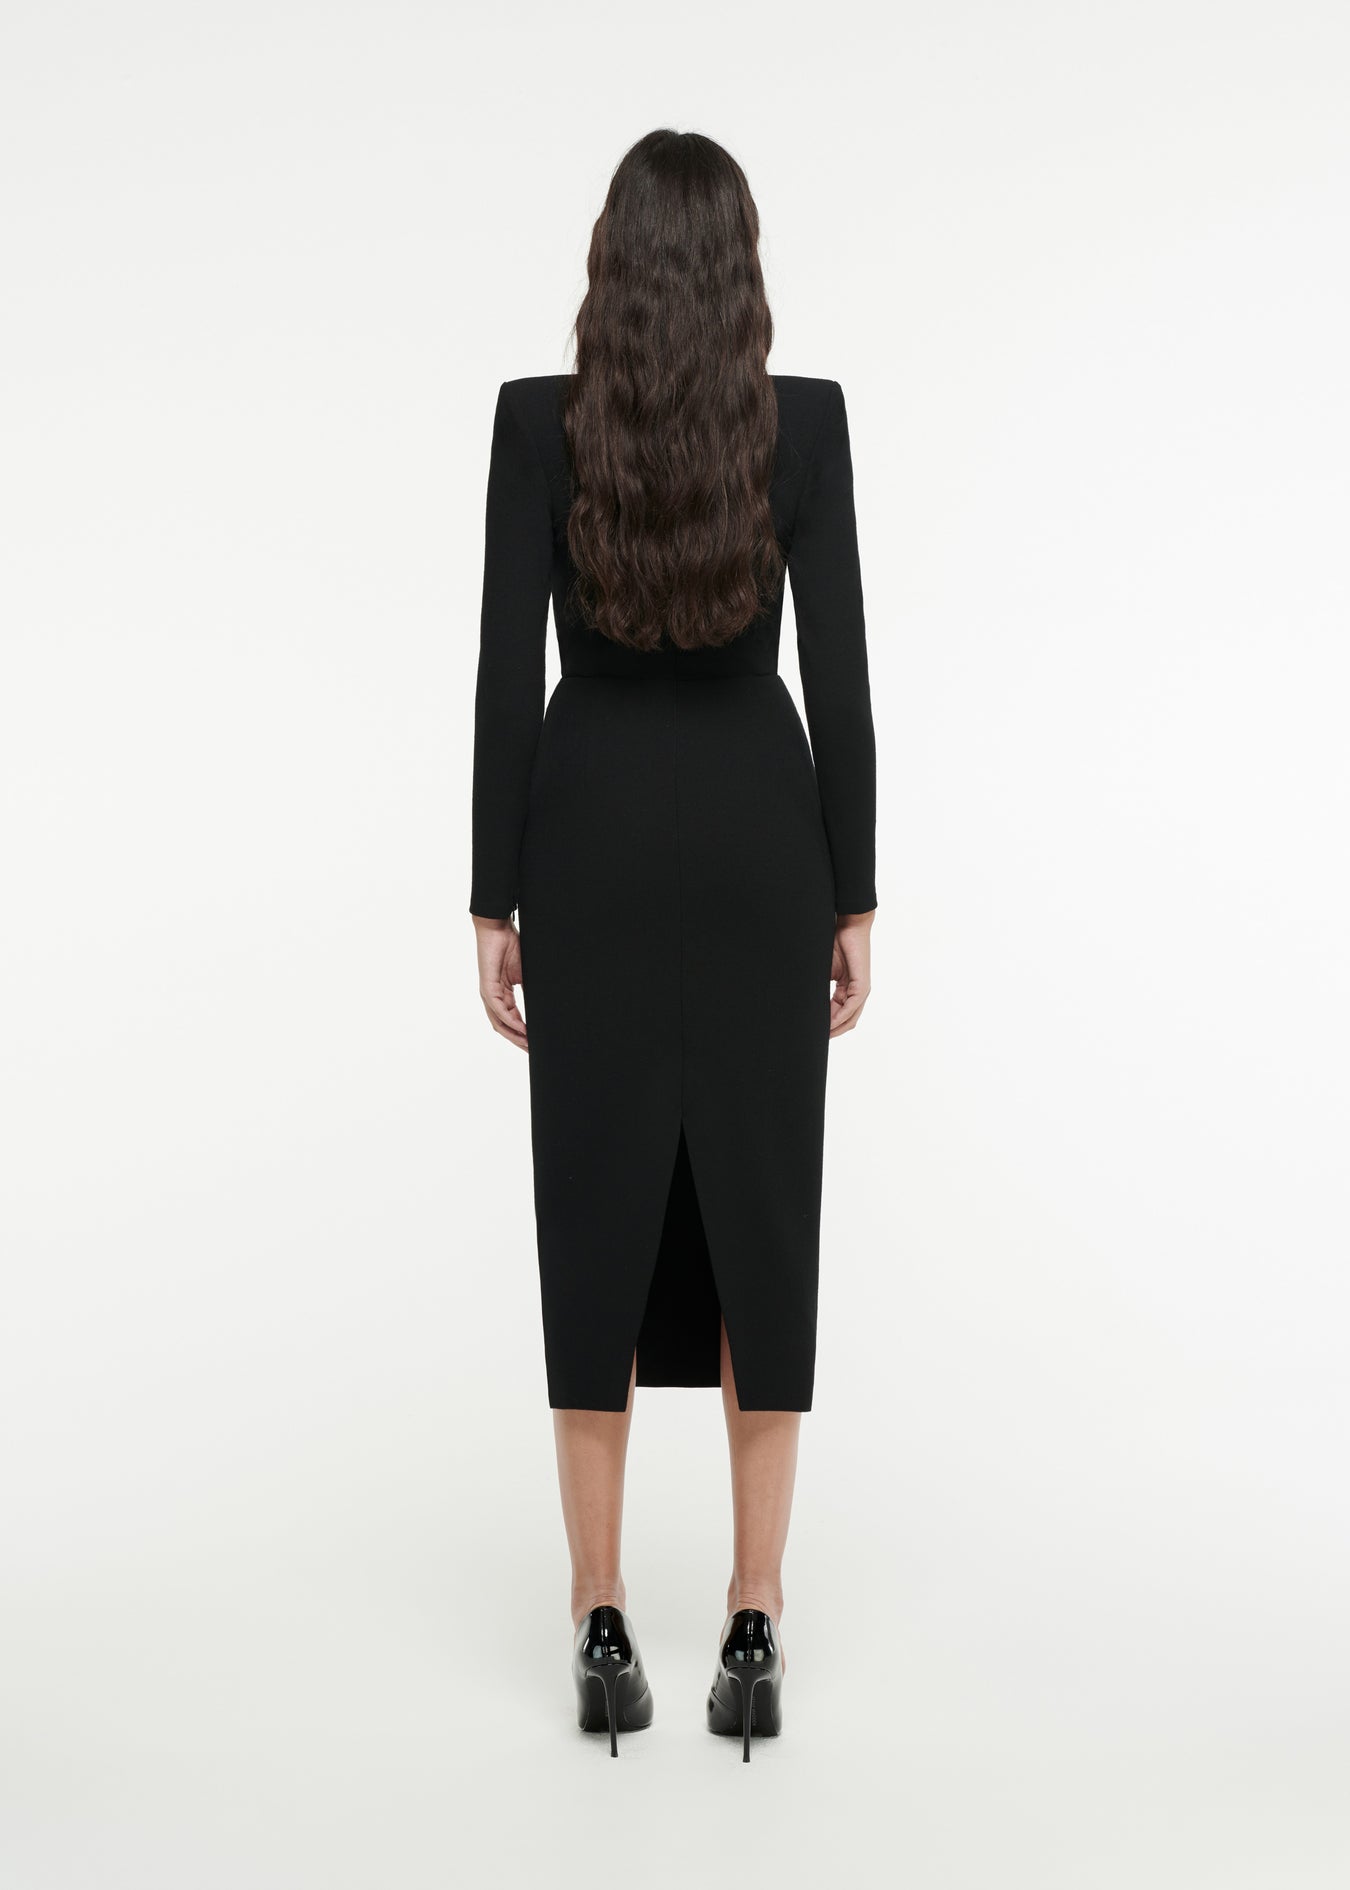 The back of a woman wearing the Long Sleeve Origami Midi Dress in Black 